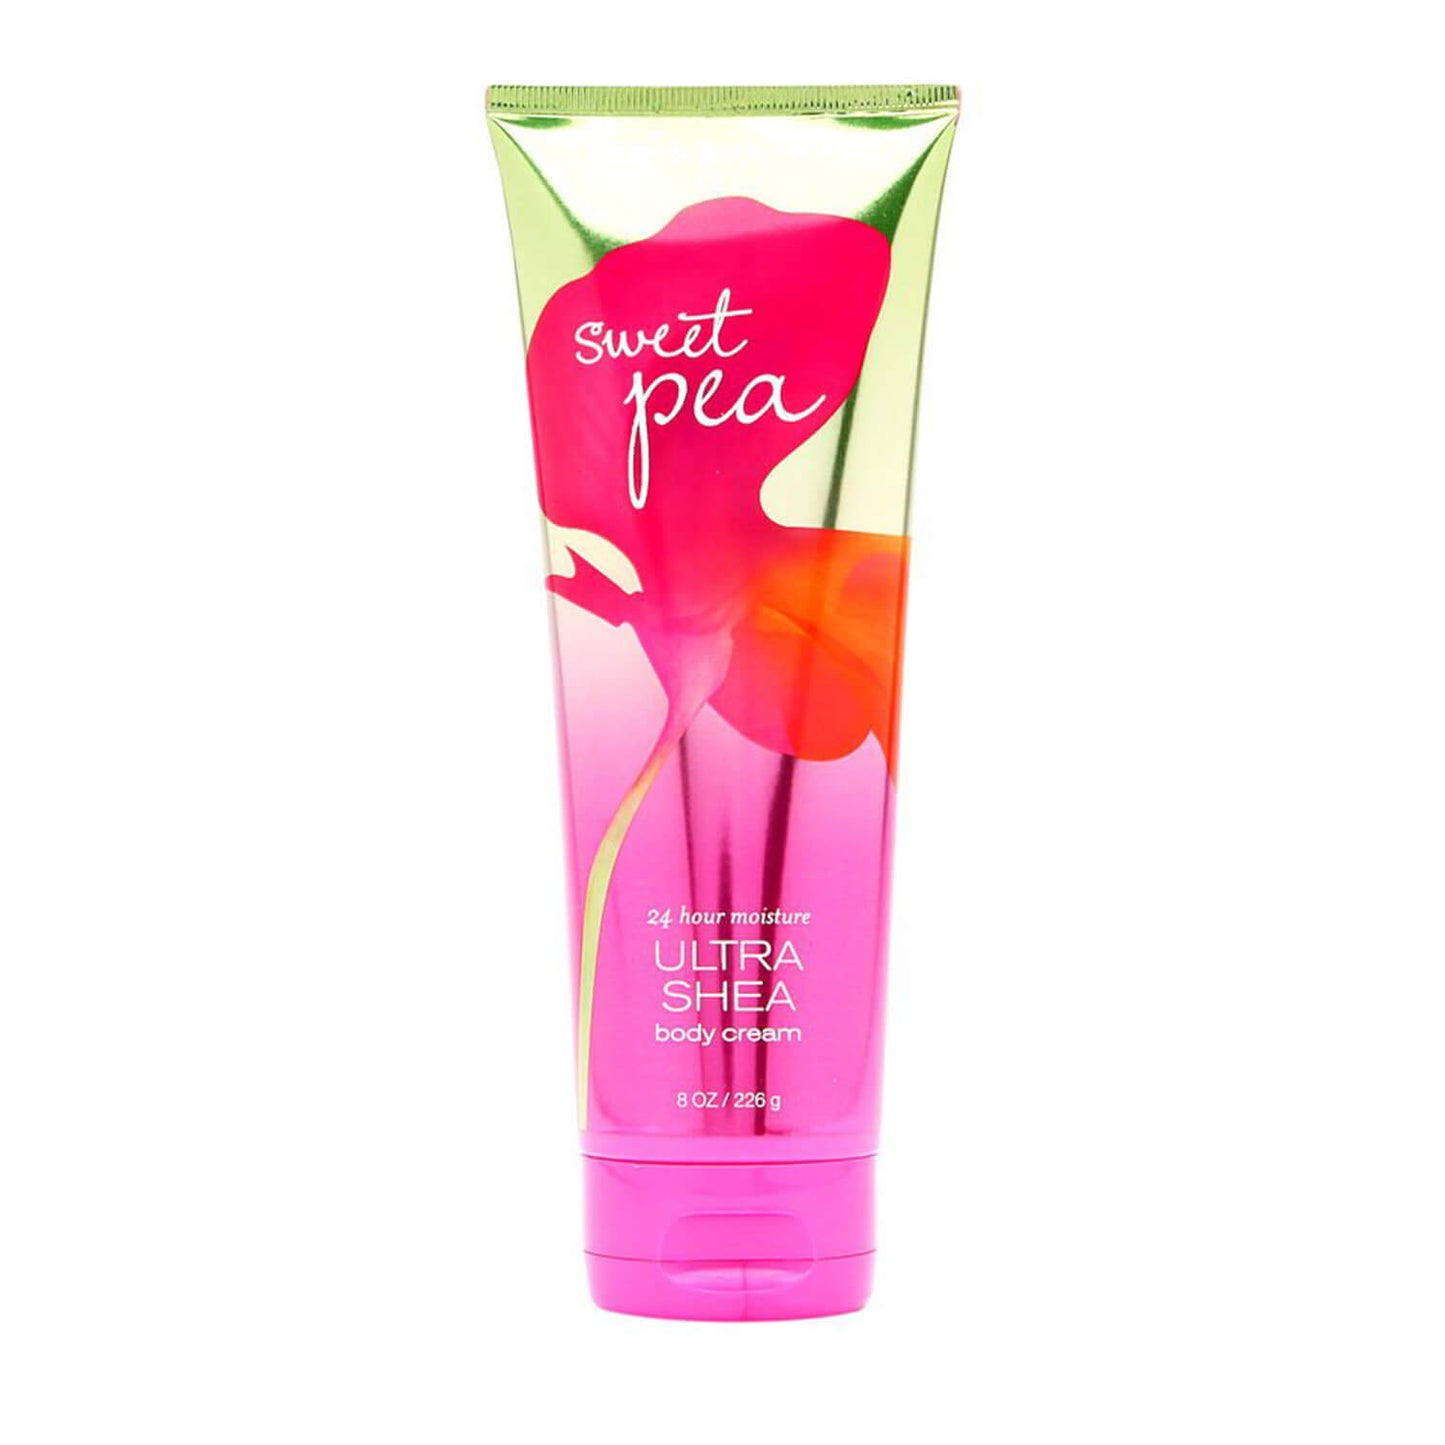 bath and body works body cream sweet pea. Delivery in karachi lahore islamabad pakistan